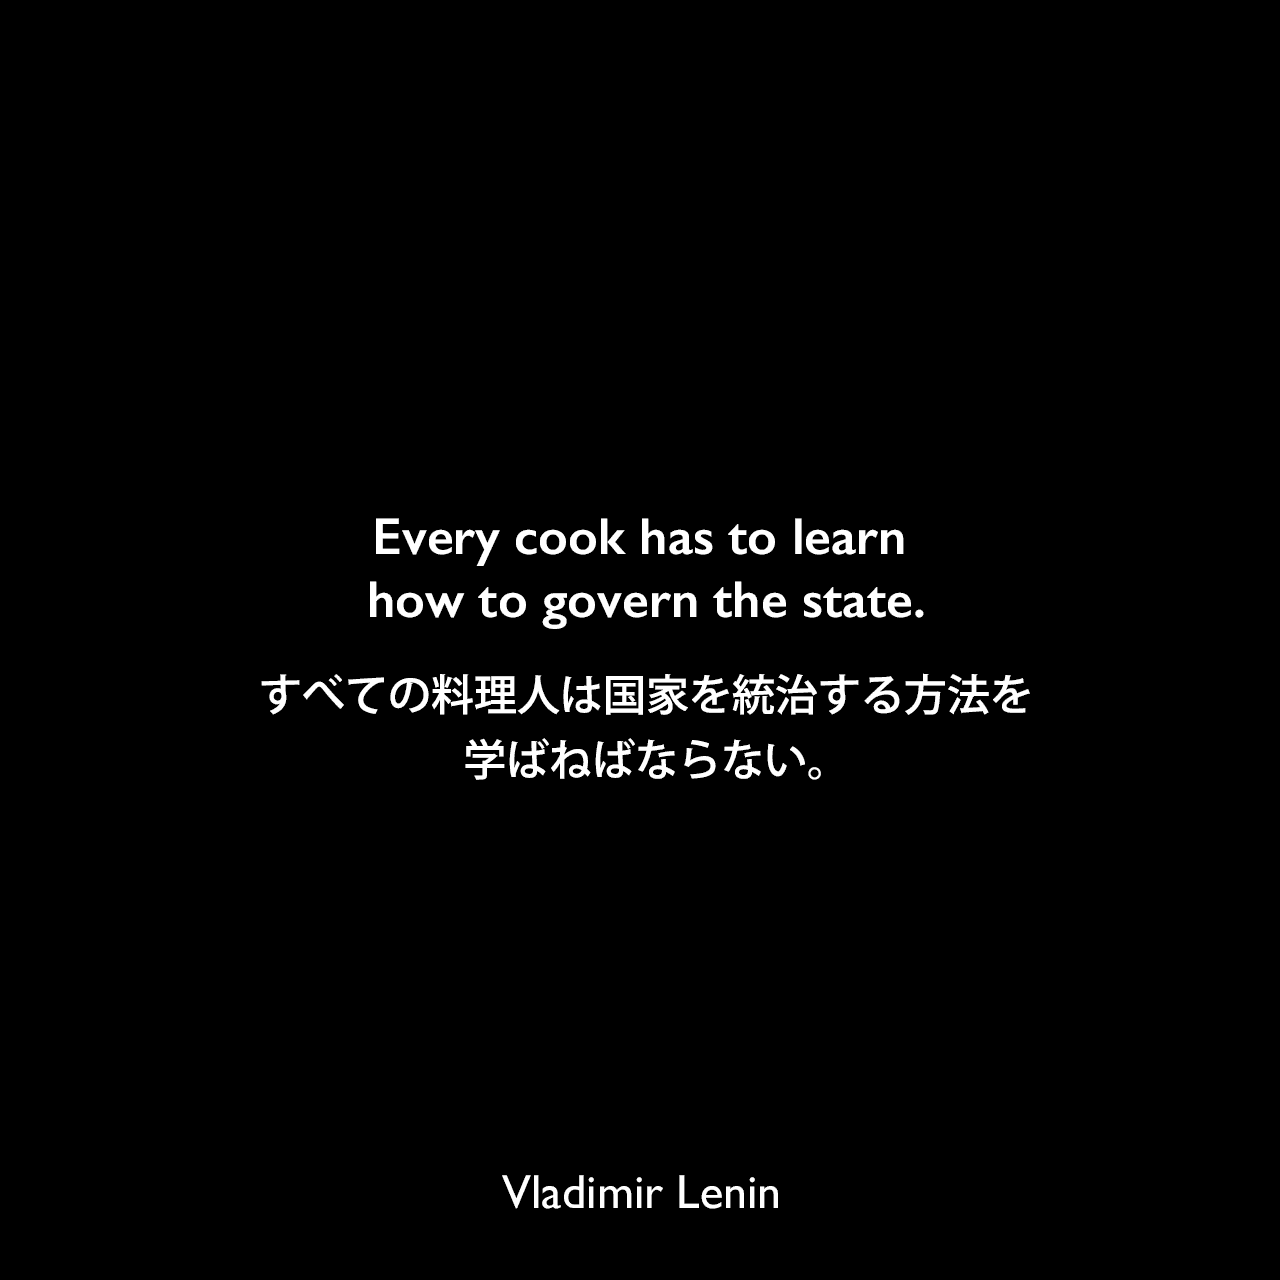 Every cook has to learn how to govern the state.すべての料理人は国家を統治する方法を学ばねばならない。Vladimir Lenin